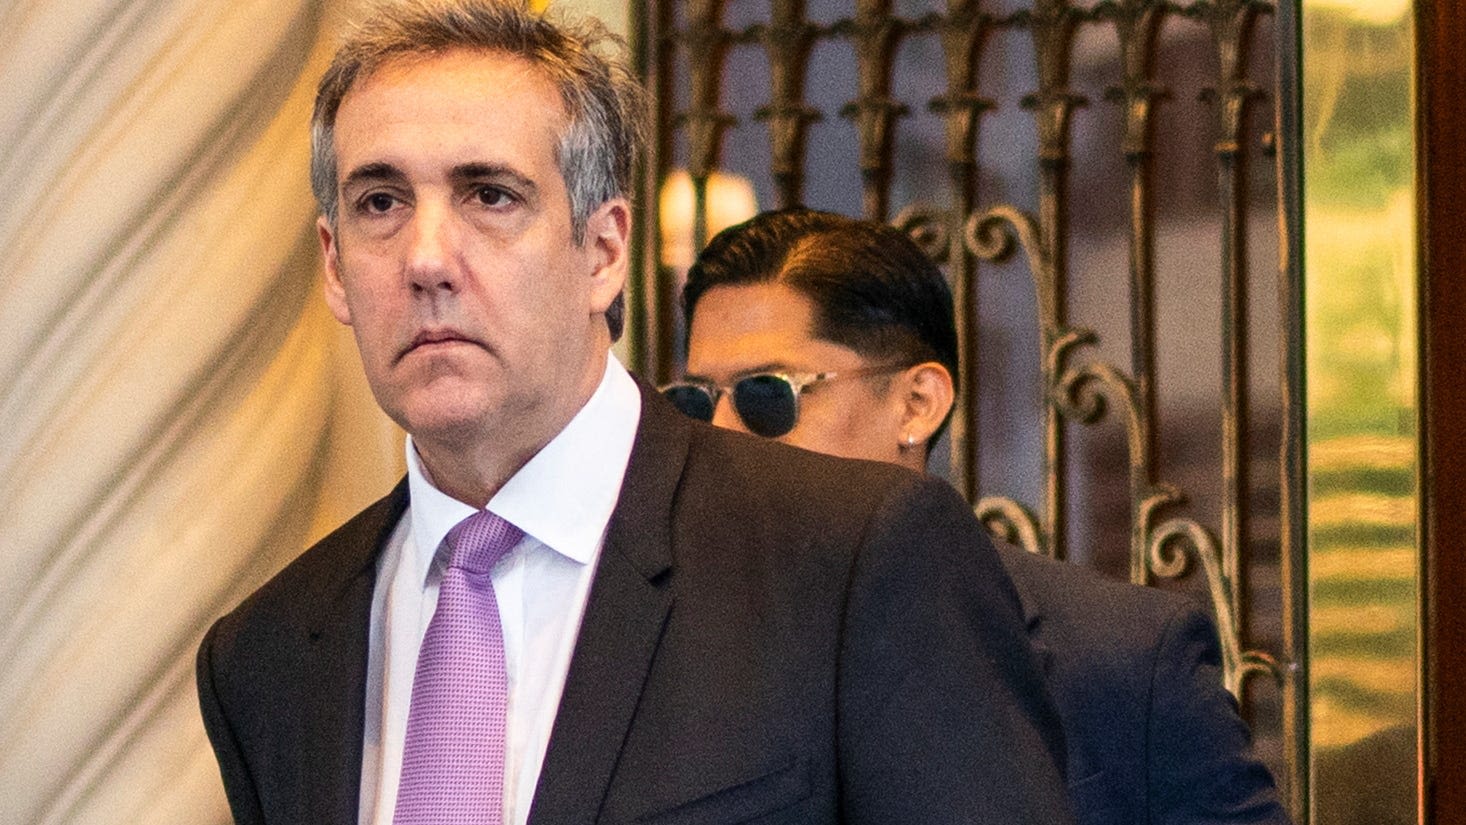 'Contemptuous' witness, Cohen accused of theft: Trump trial testimony comes to explosive end